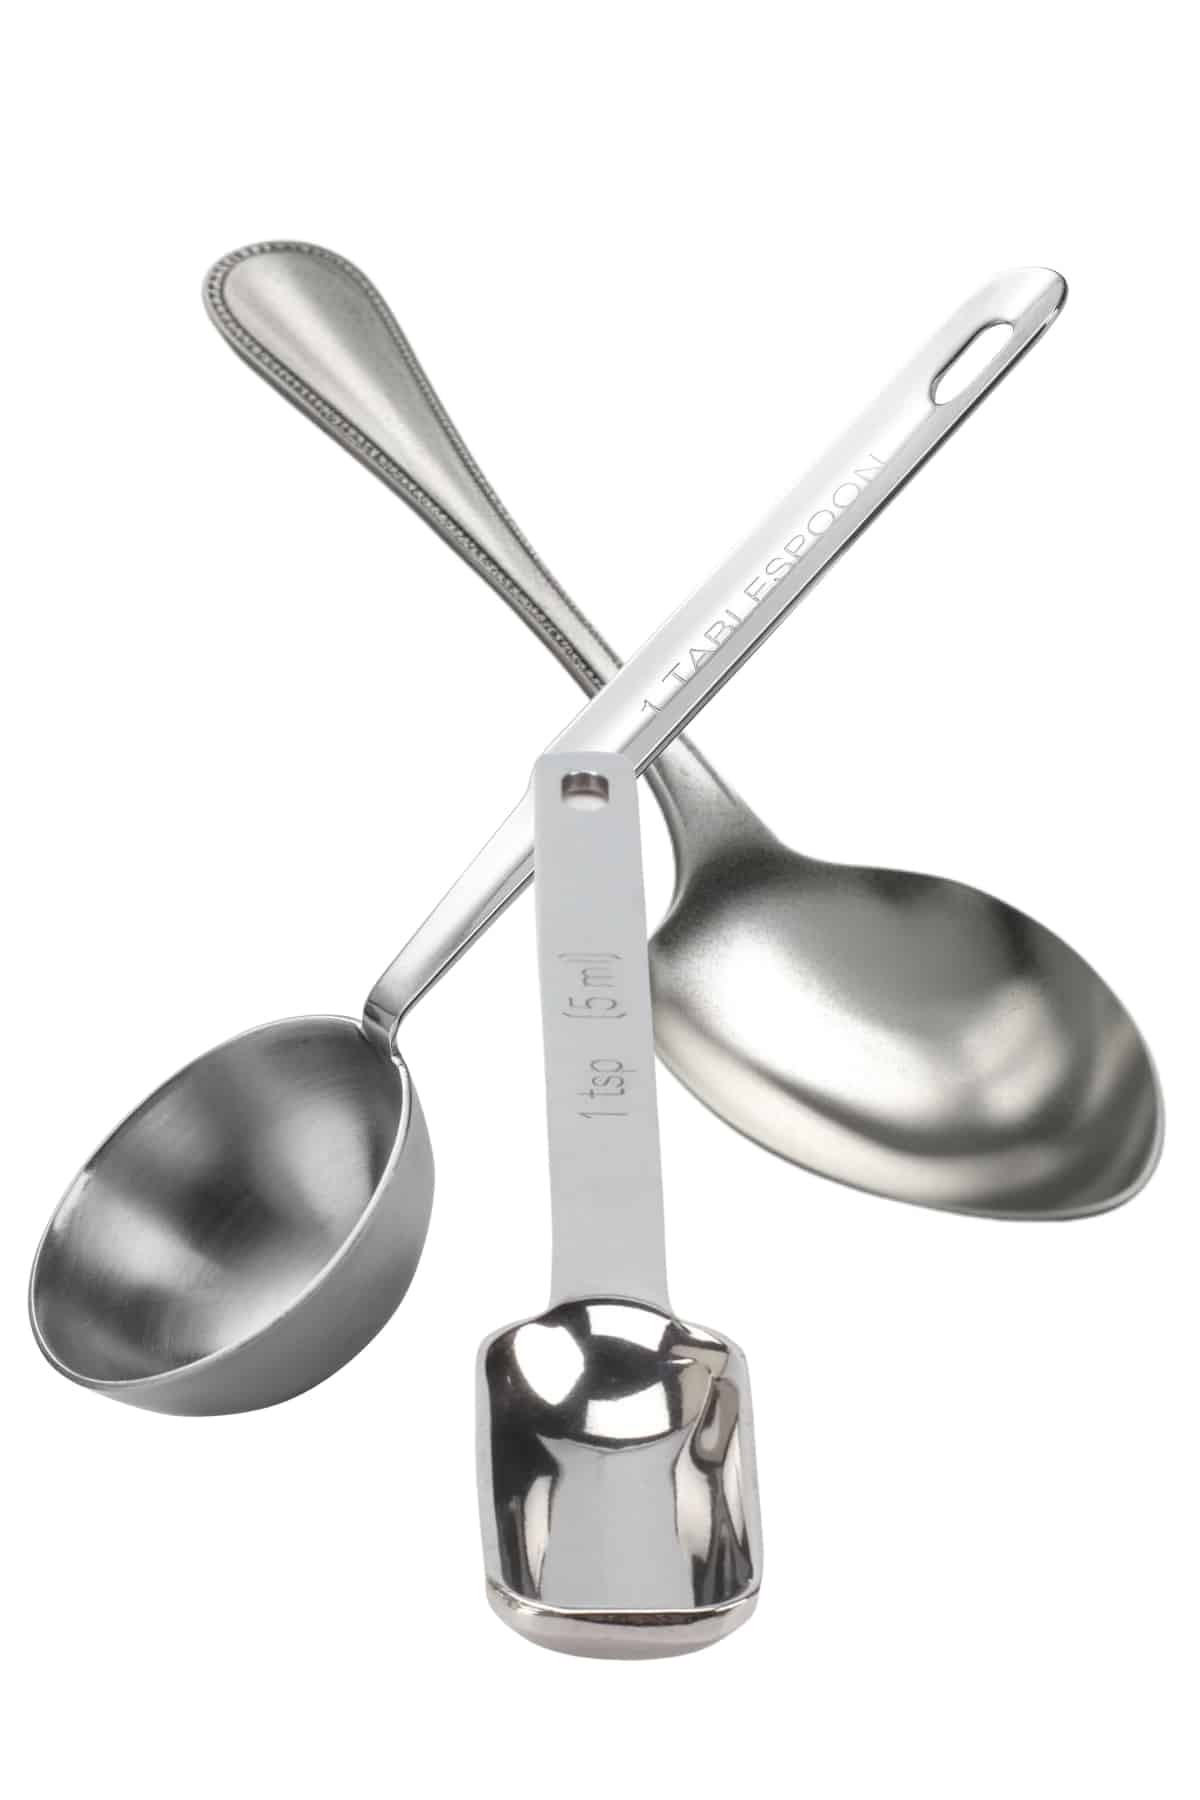 Buy The Mg Measuring Spoon For Accurate Results 